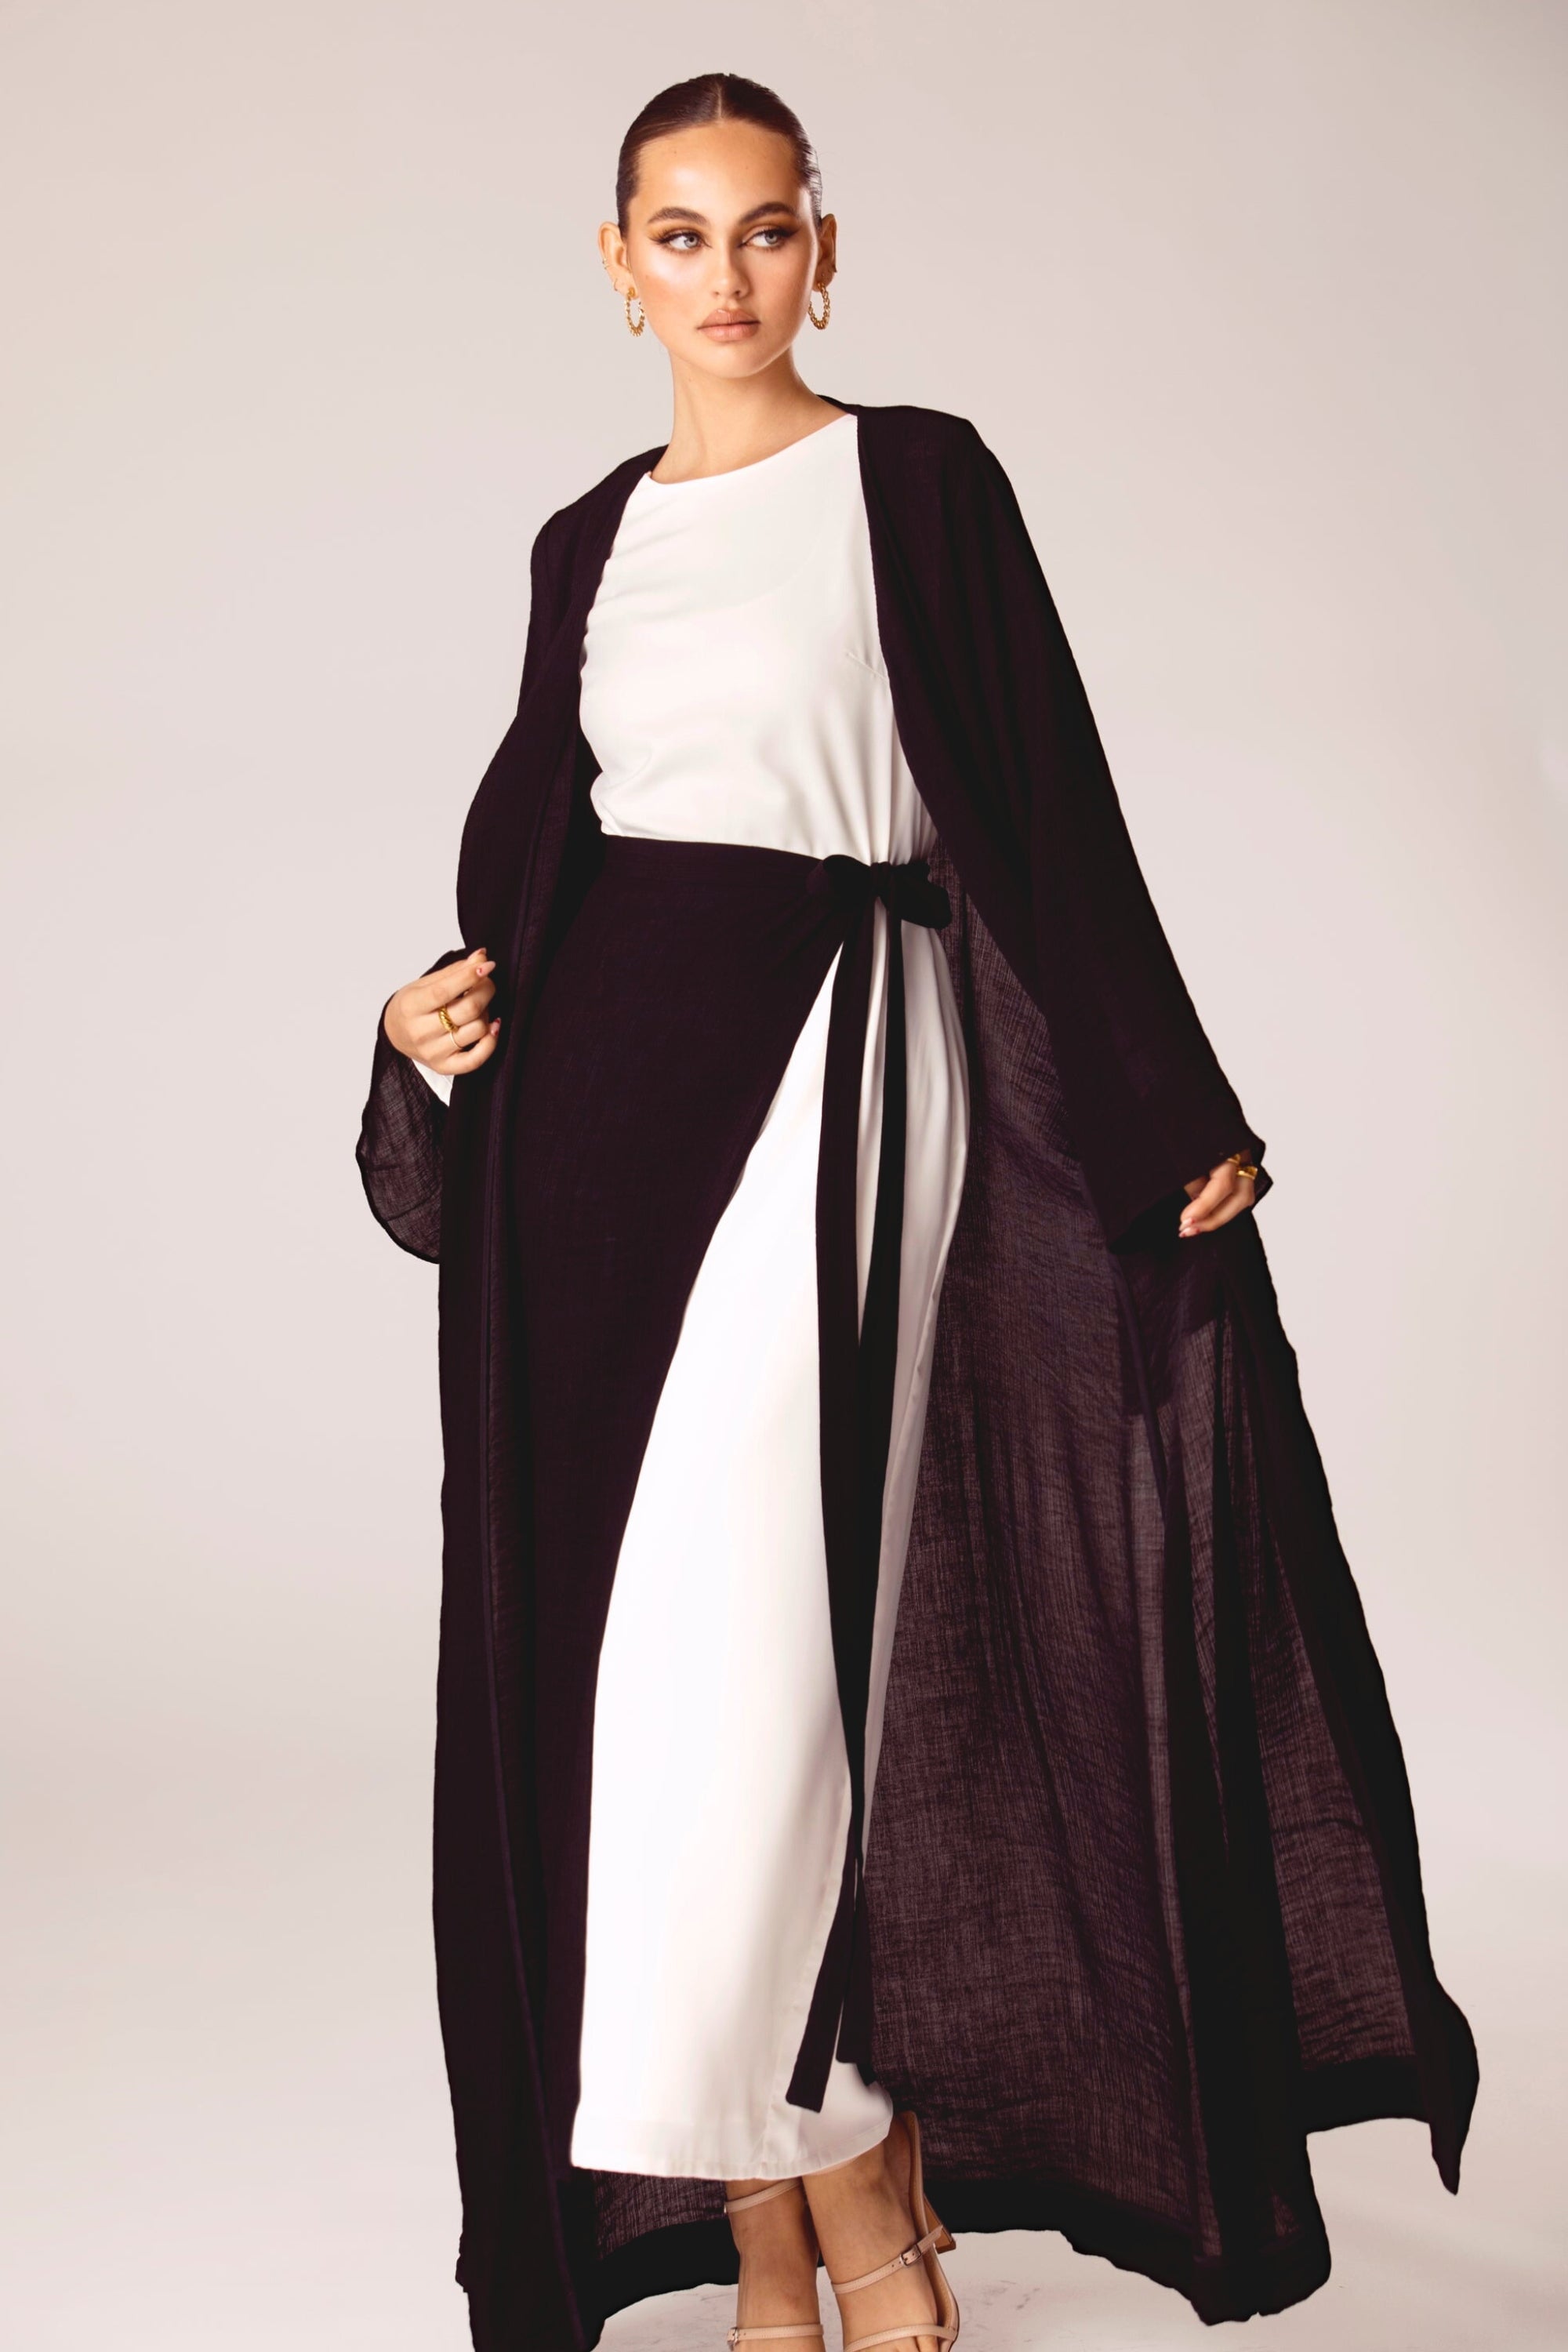 Rana Textured Open Abaya and Skirt Set - Espresso Clothing Veiled Collection 